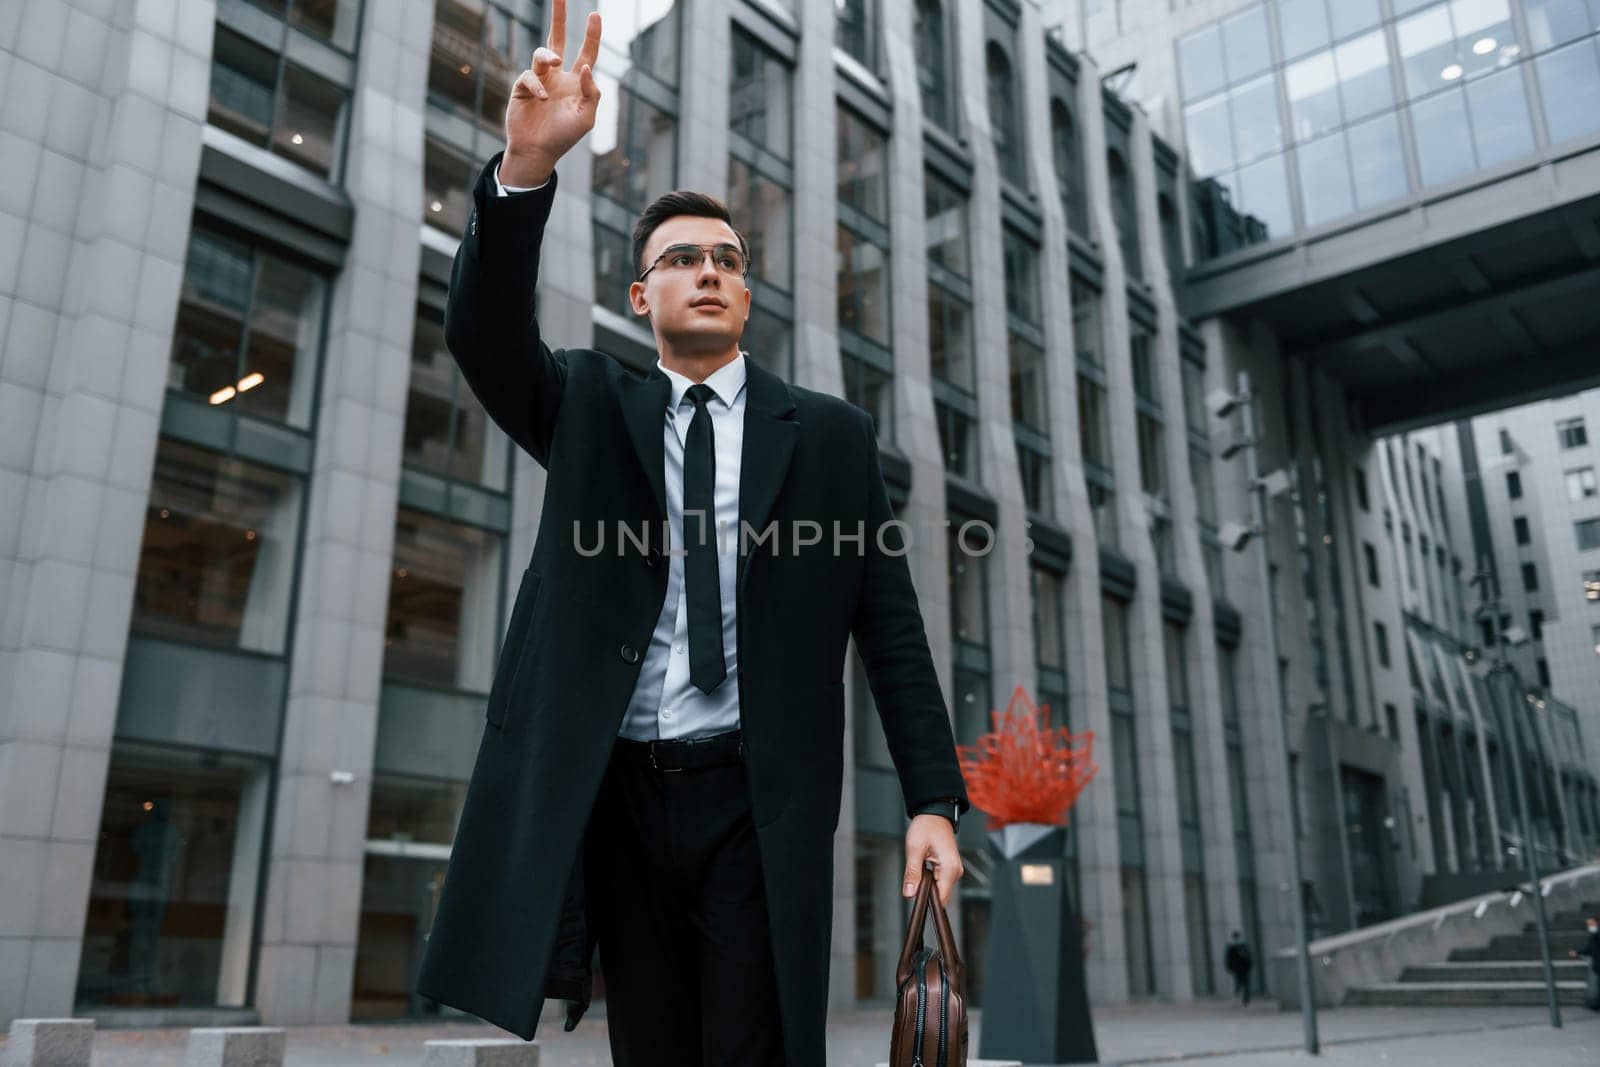 Raises his right hand. Businessman in black suit and tie is outdoors in the city.